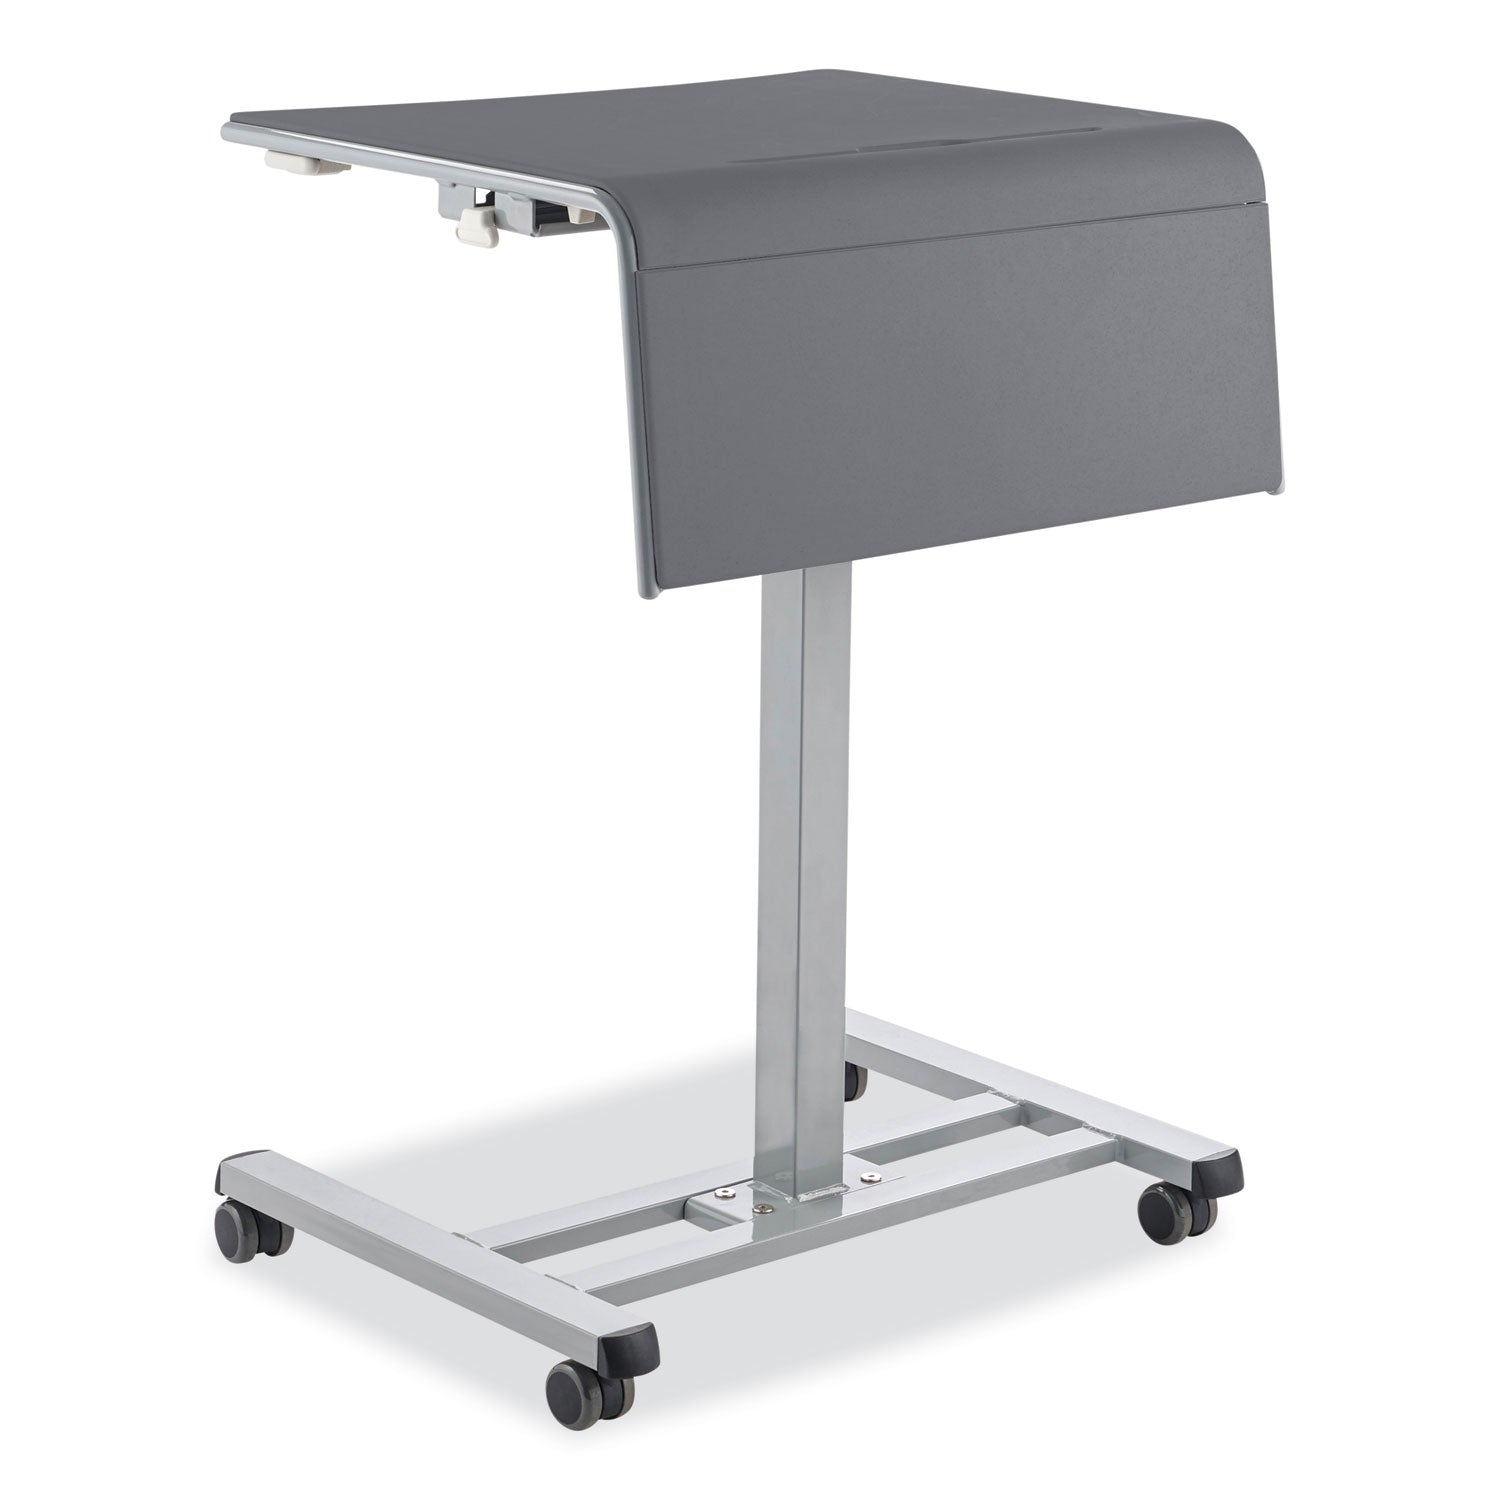 sit-stand-student-desk-pro-235-x-195-x-285-to-4175-charcoal-gray-ships-in-1-3-business-days_npsssdg20 - 1